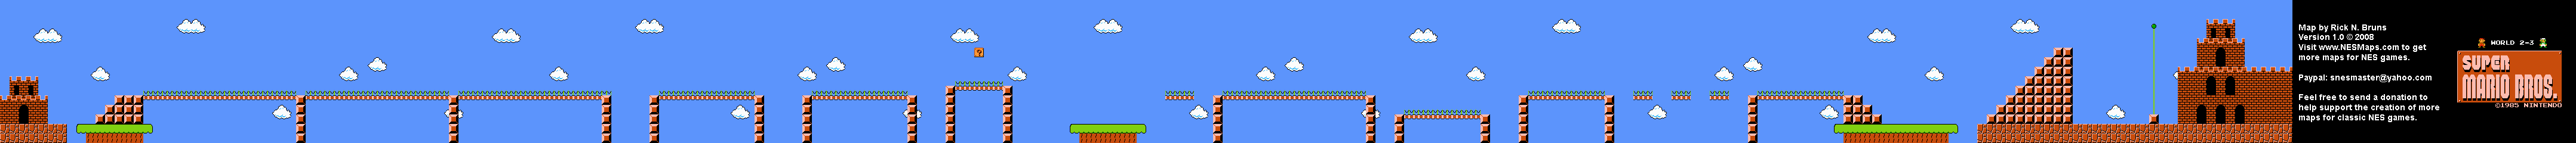 Super Mario Brothers - World 2-3 Nintendo NES Background Only Map